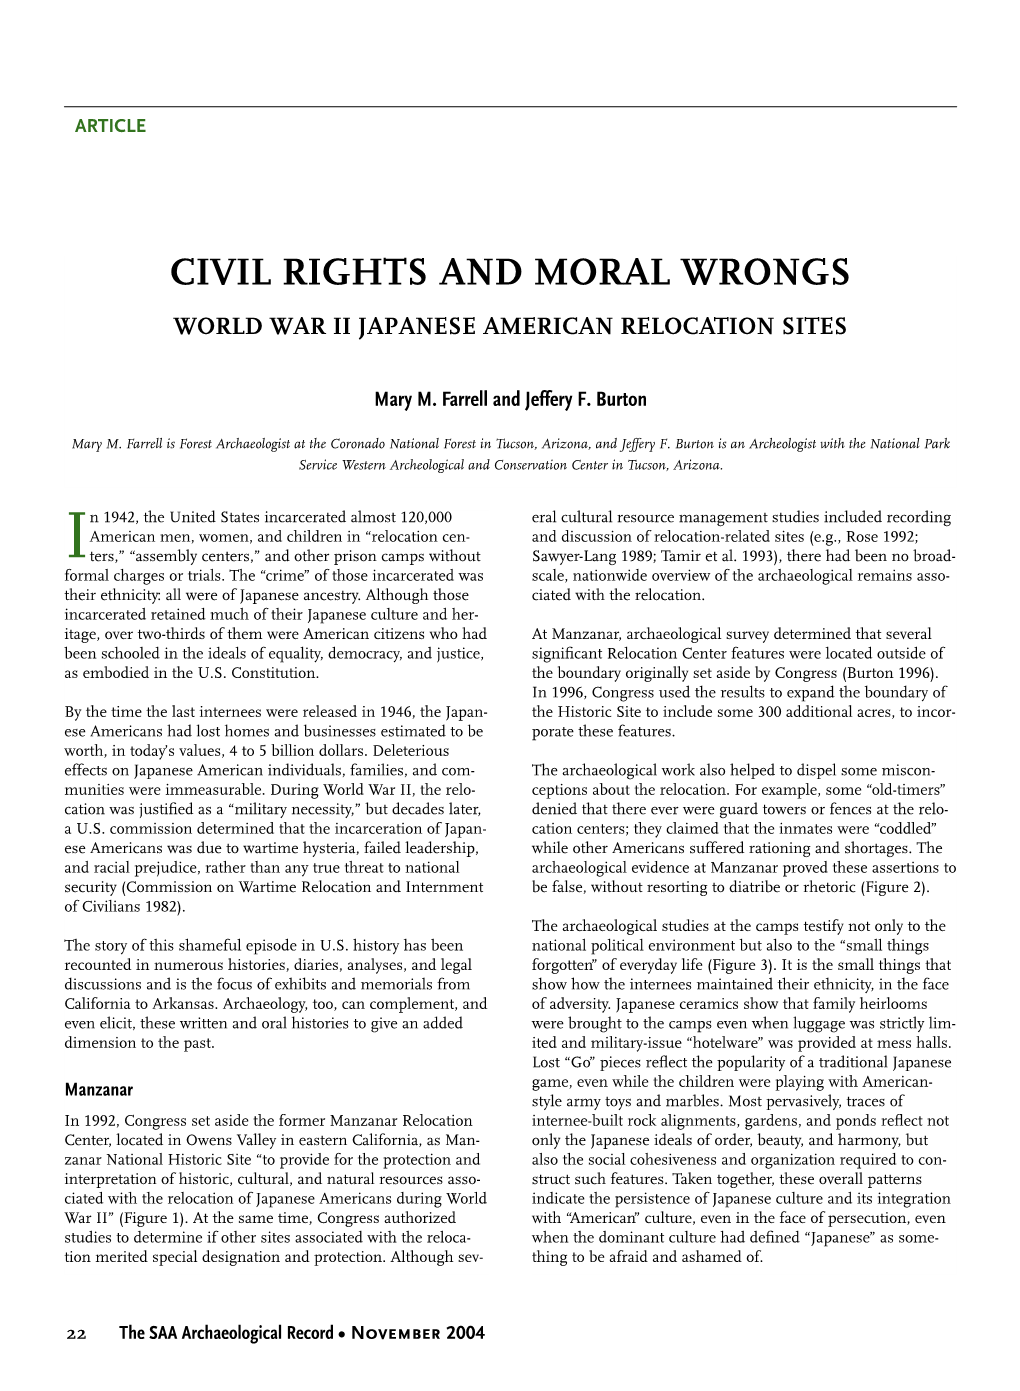 Civil Rights and Moral Wrongs World War Ii Japanese American Relocation Sites